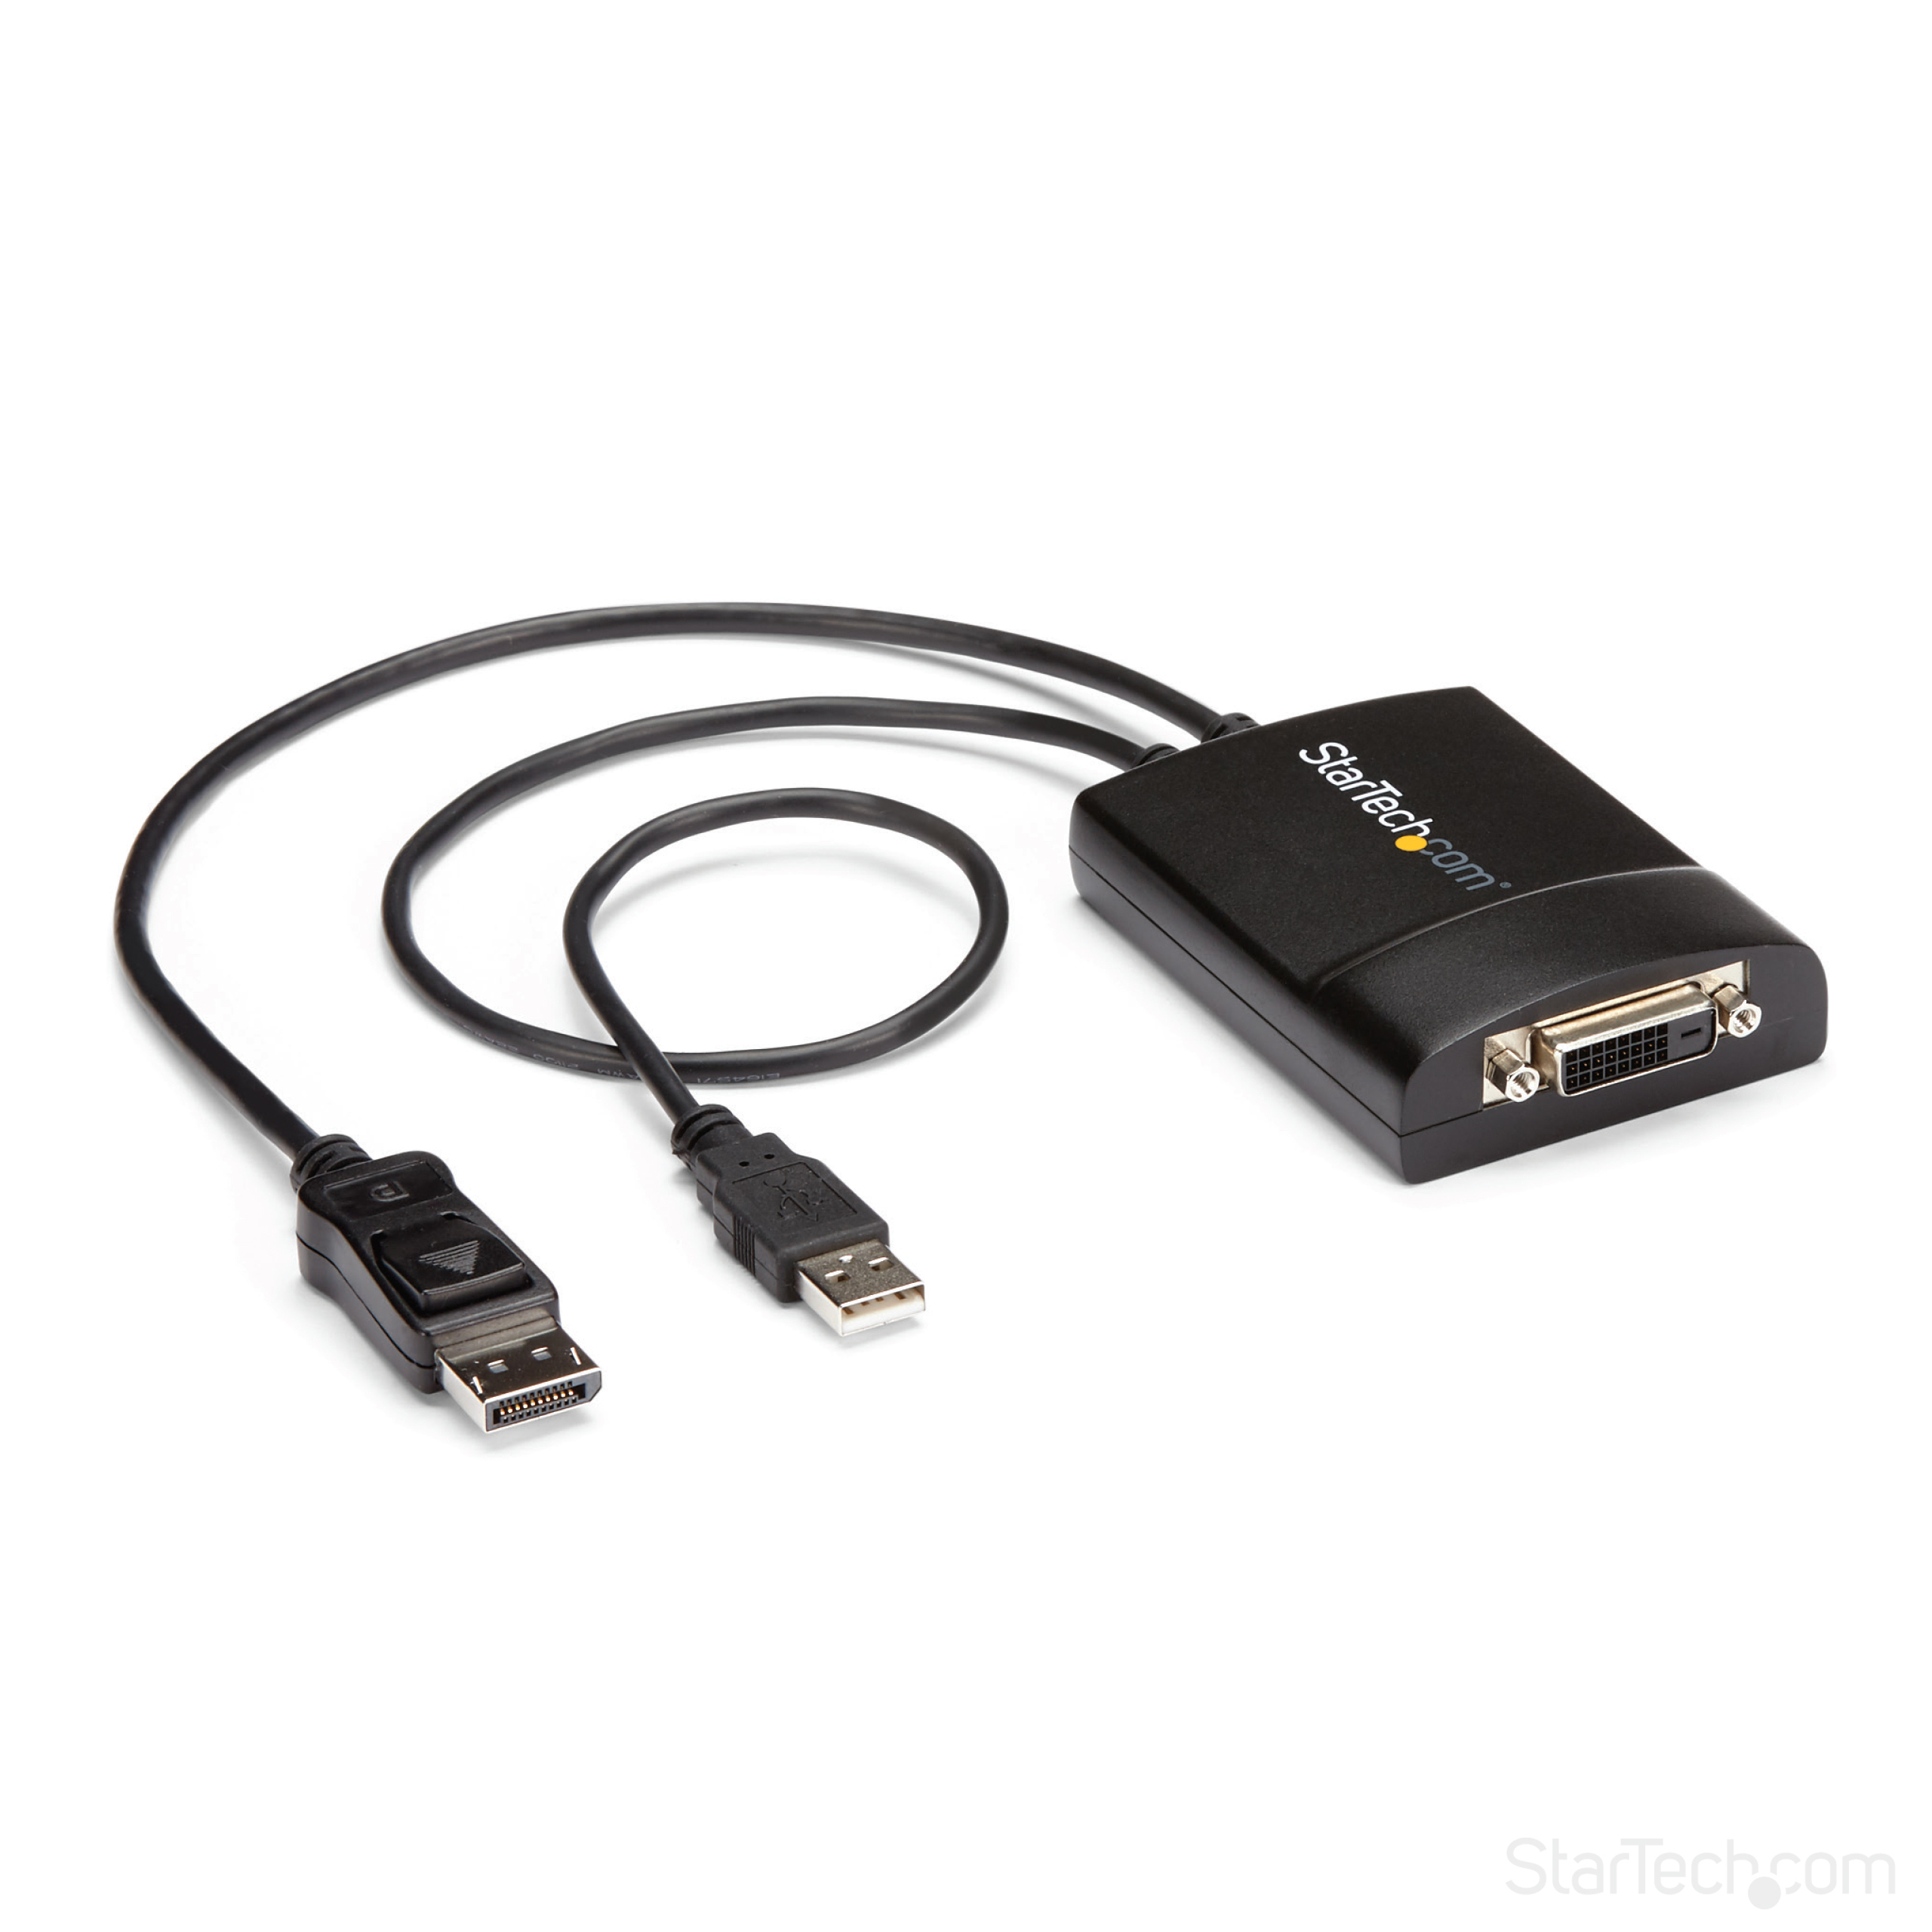 StarTech.com DisplayPort to DVI Adapter - Dual-Link - Active DVI-D Adapter for Your Monitor / Display - USB Powered - 2560x1600 (DP2DVID2)